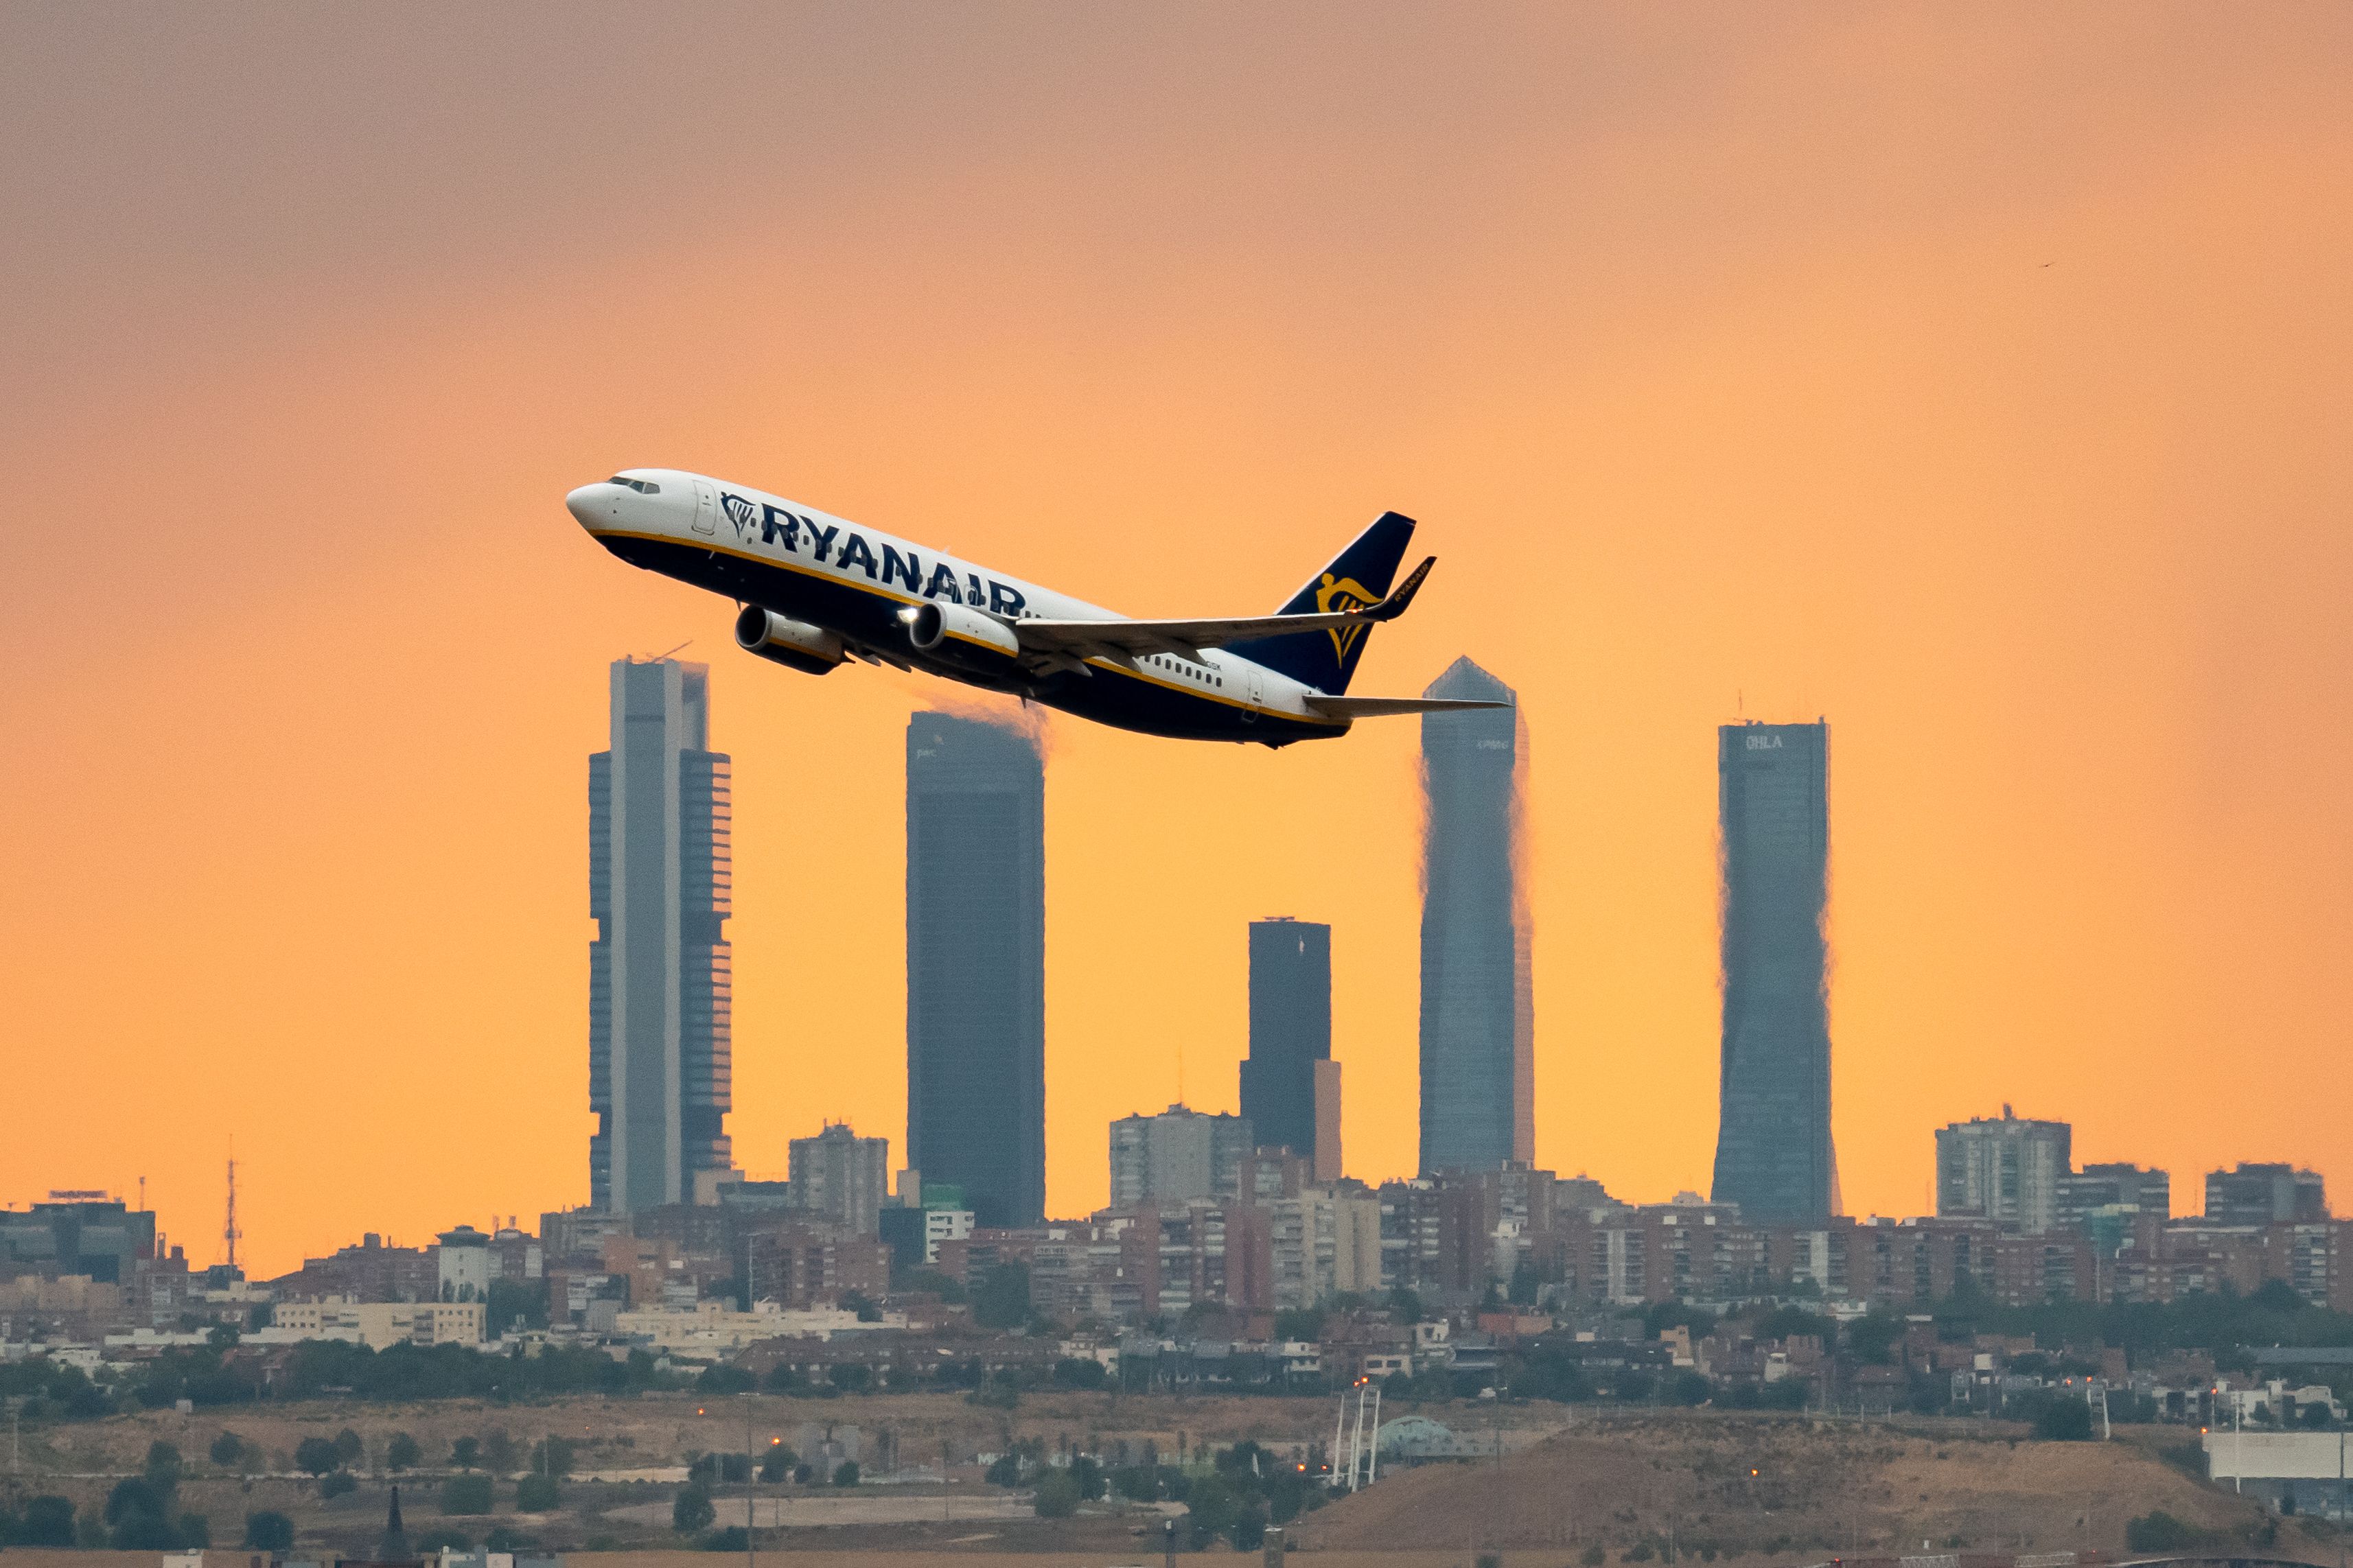 A Ryanair Boeing 737-800 takes off from Madrid at sunset.